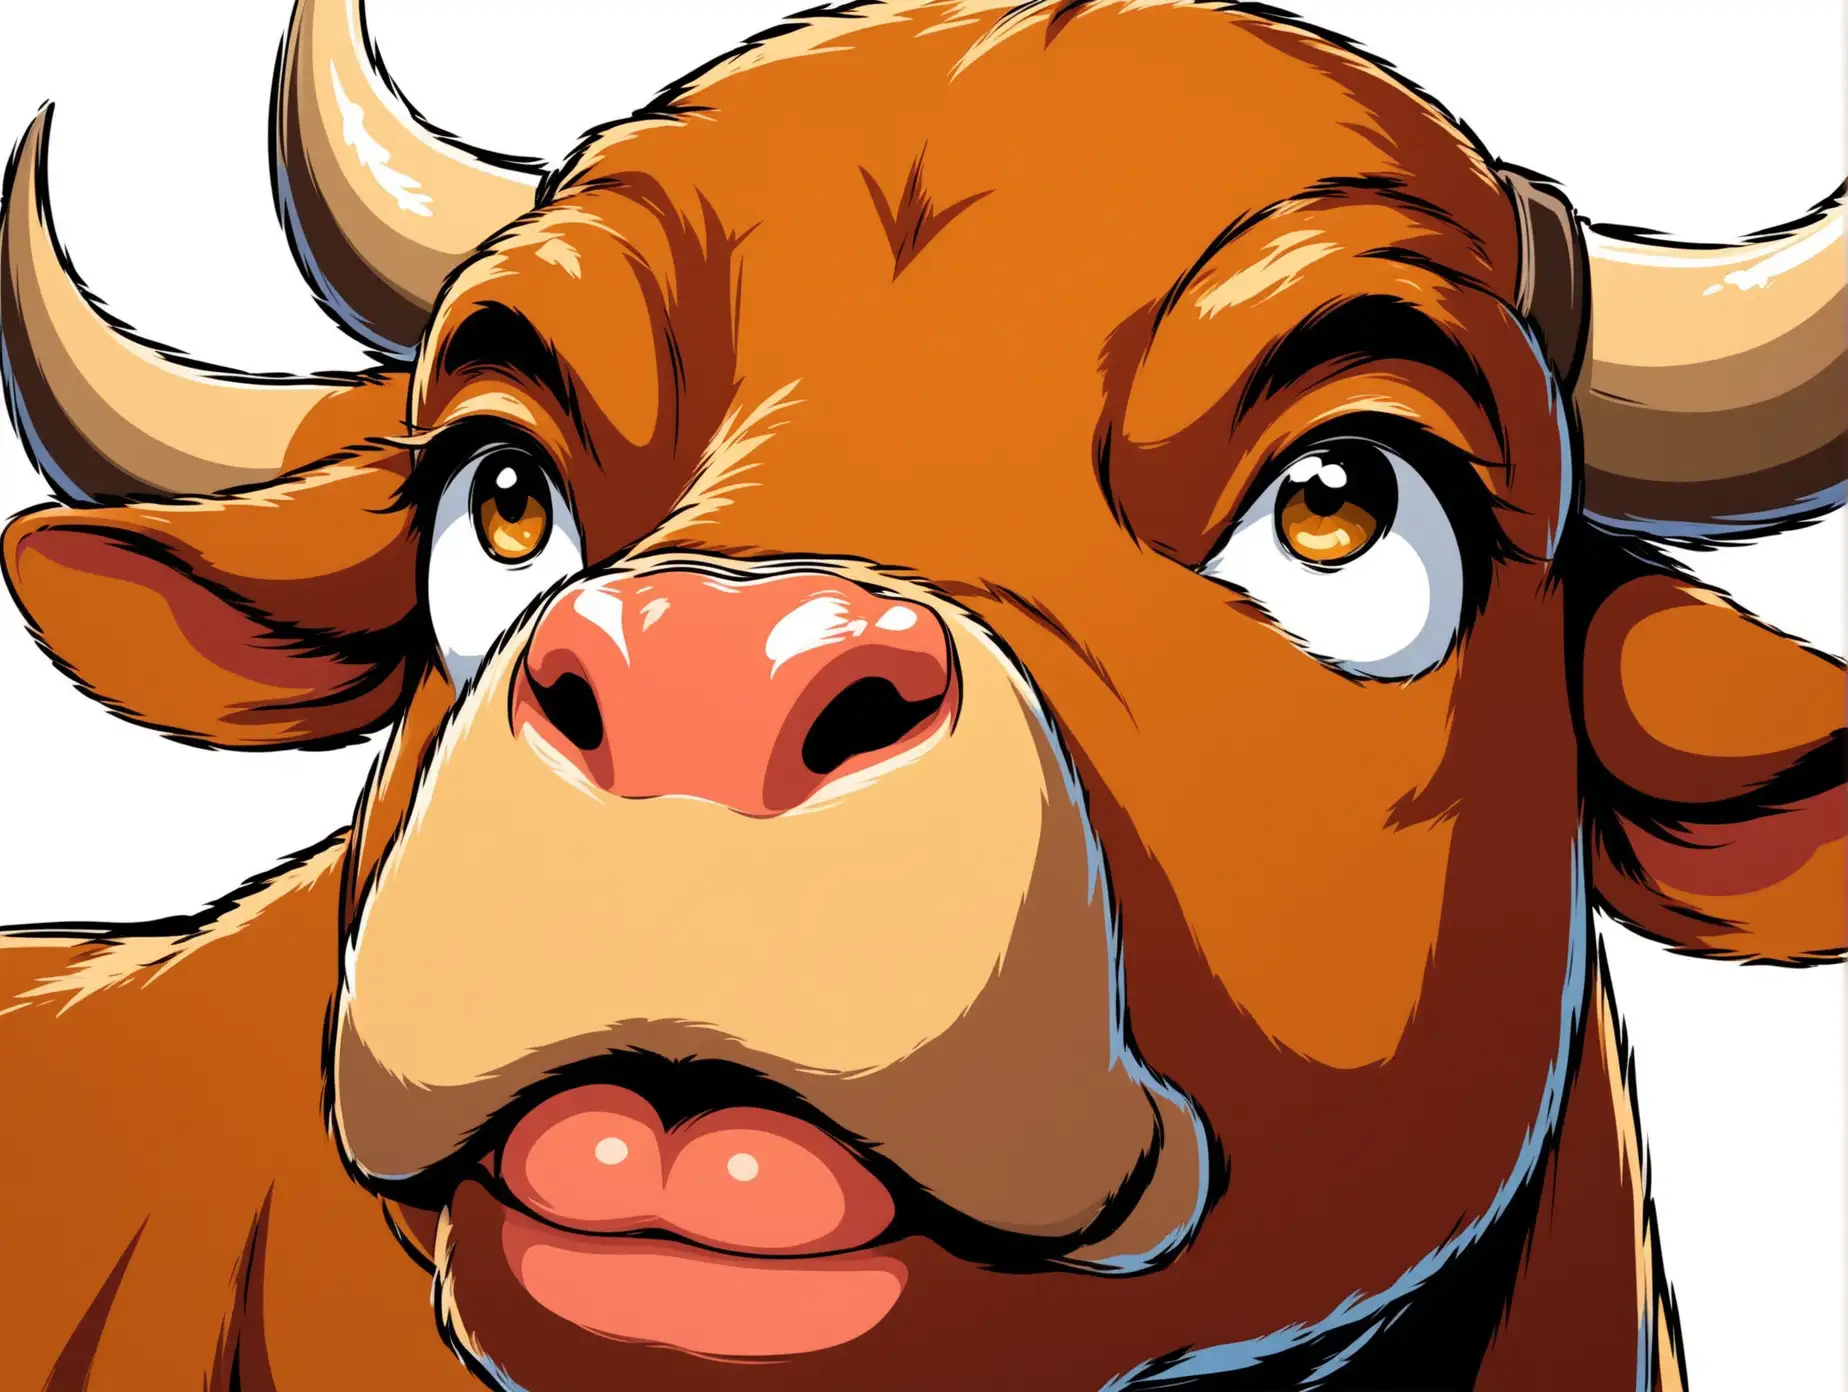 A cartoon bull's nose and mouth up close